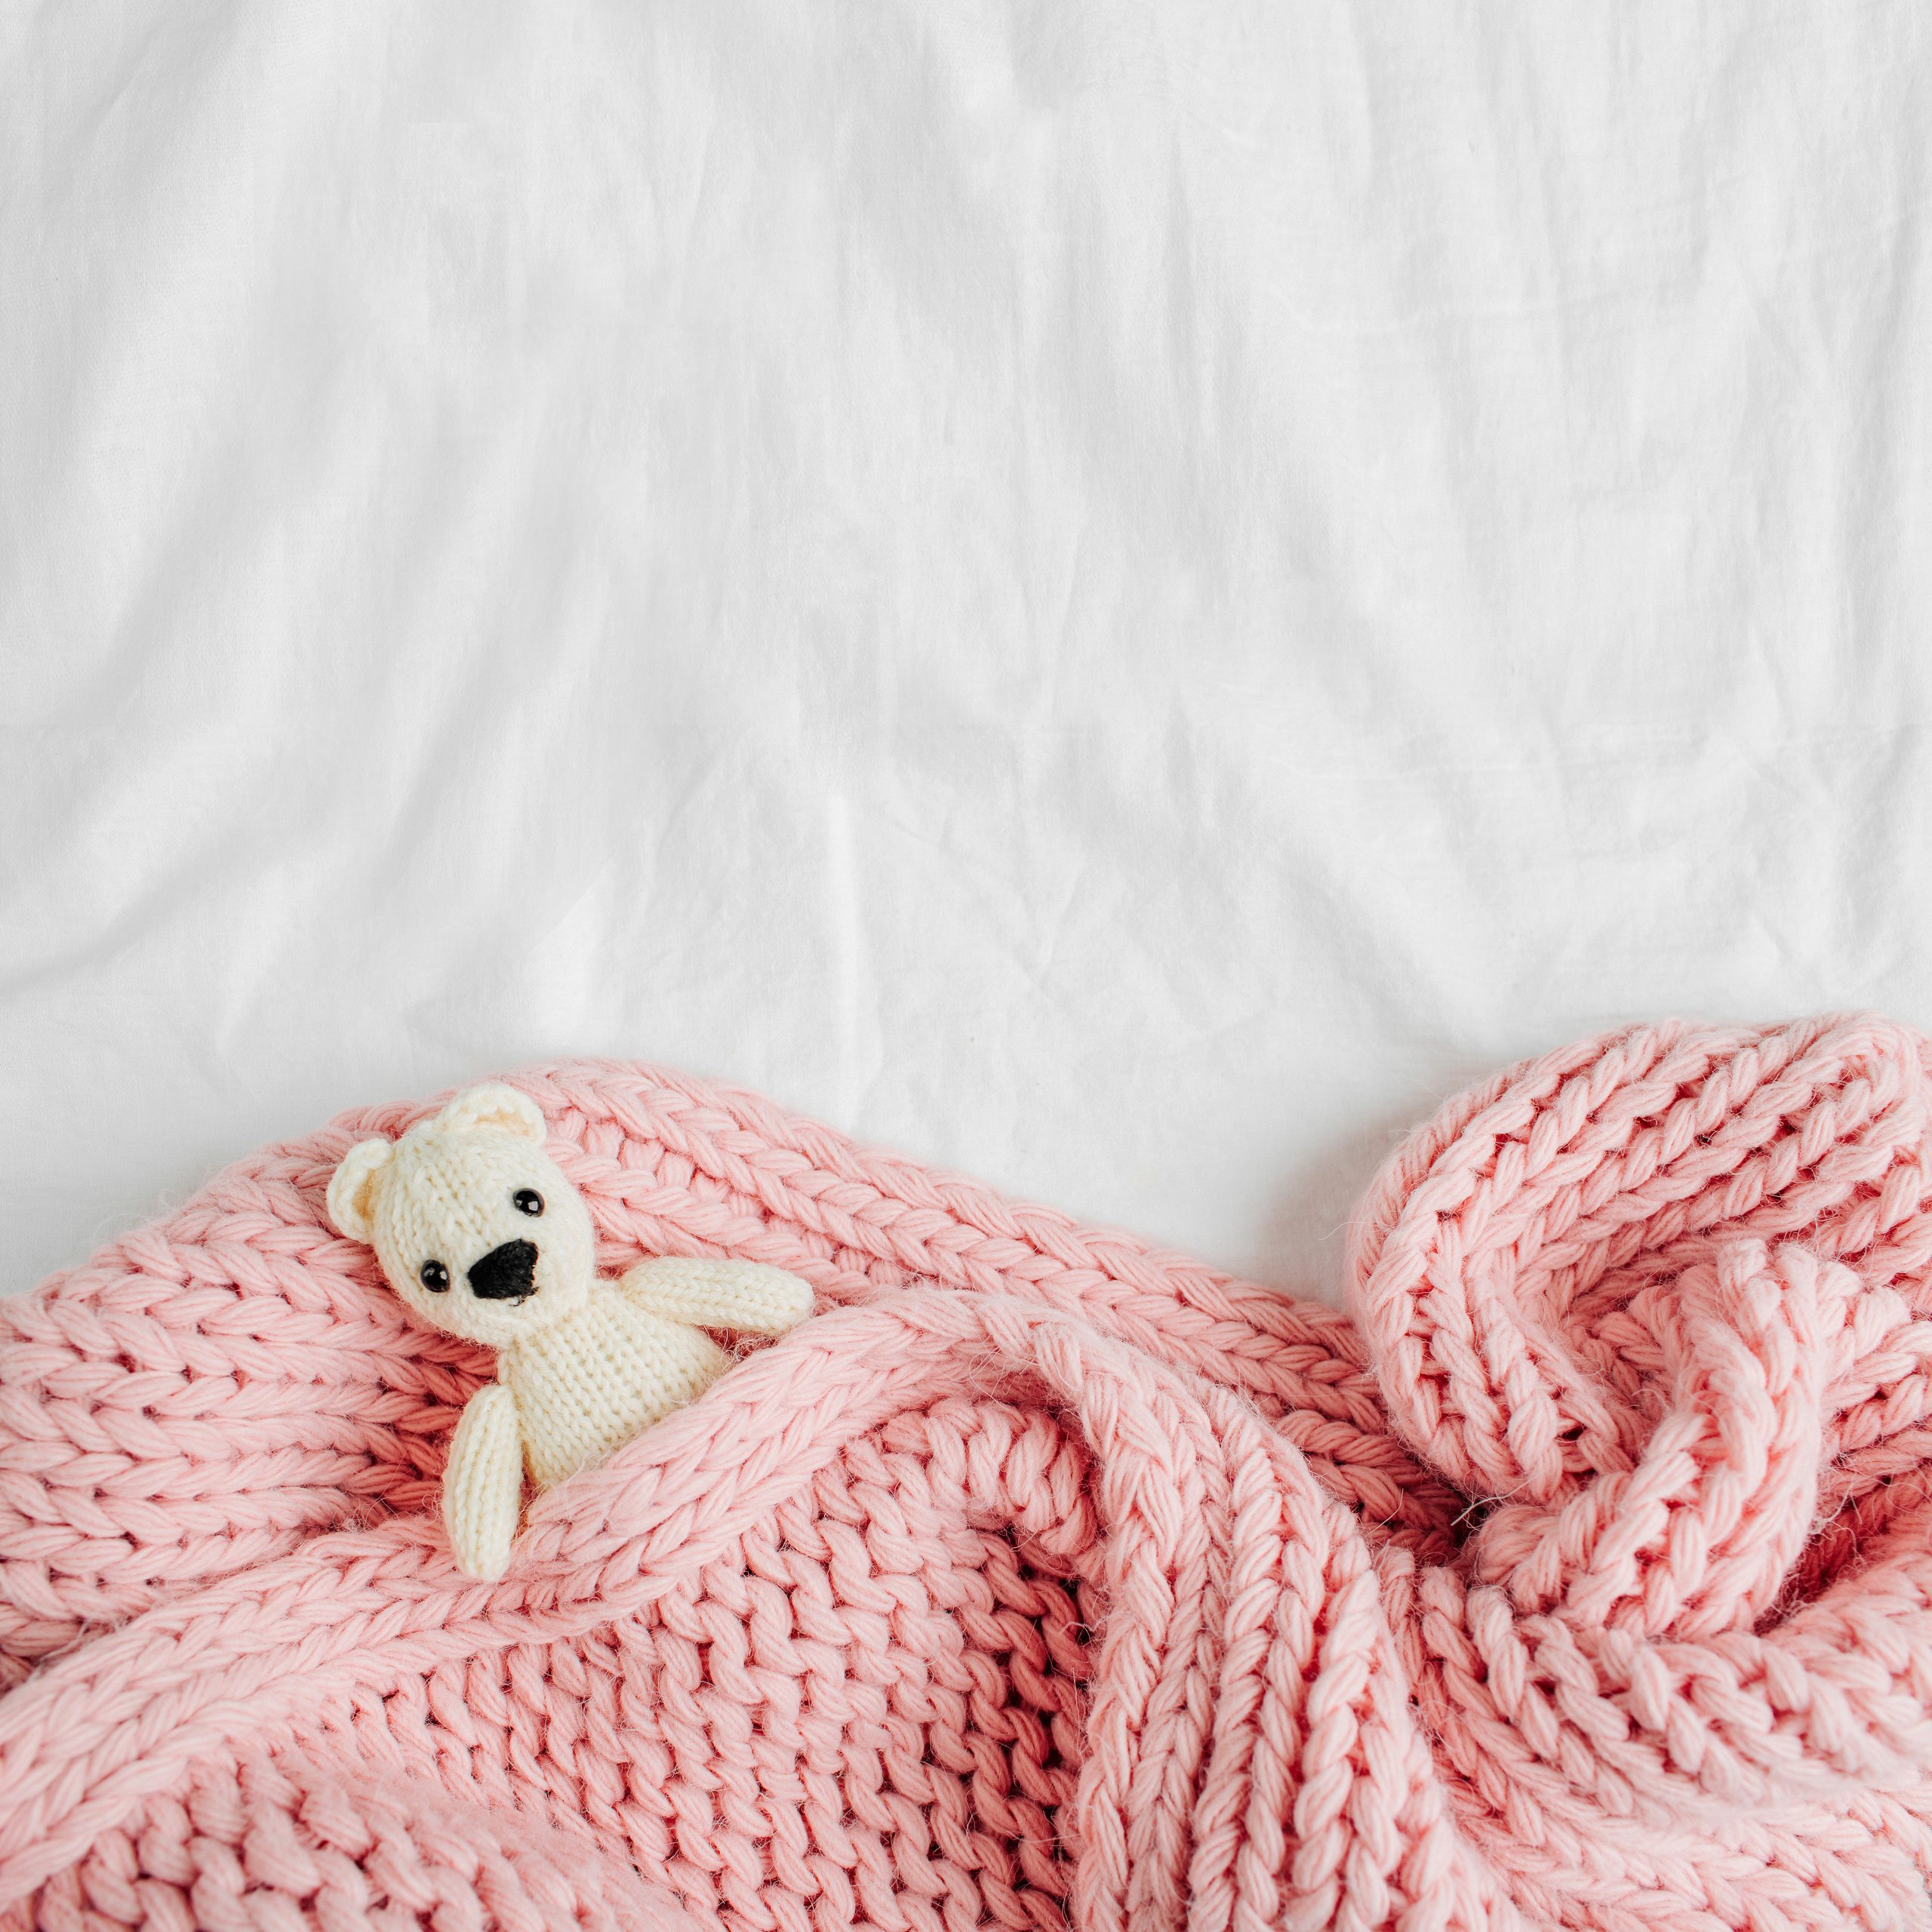 A pink baby blanket covering a small toy bear.